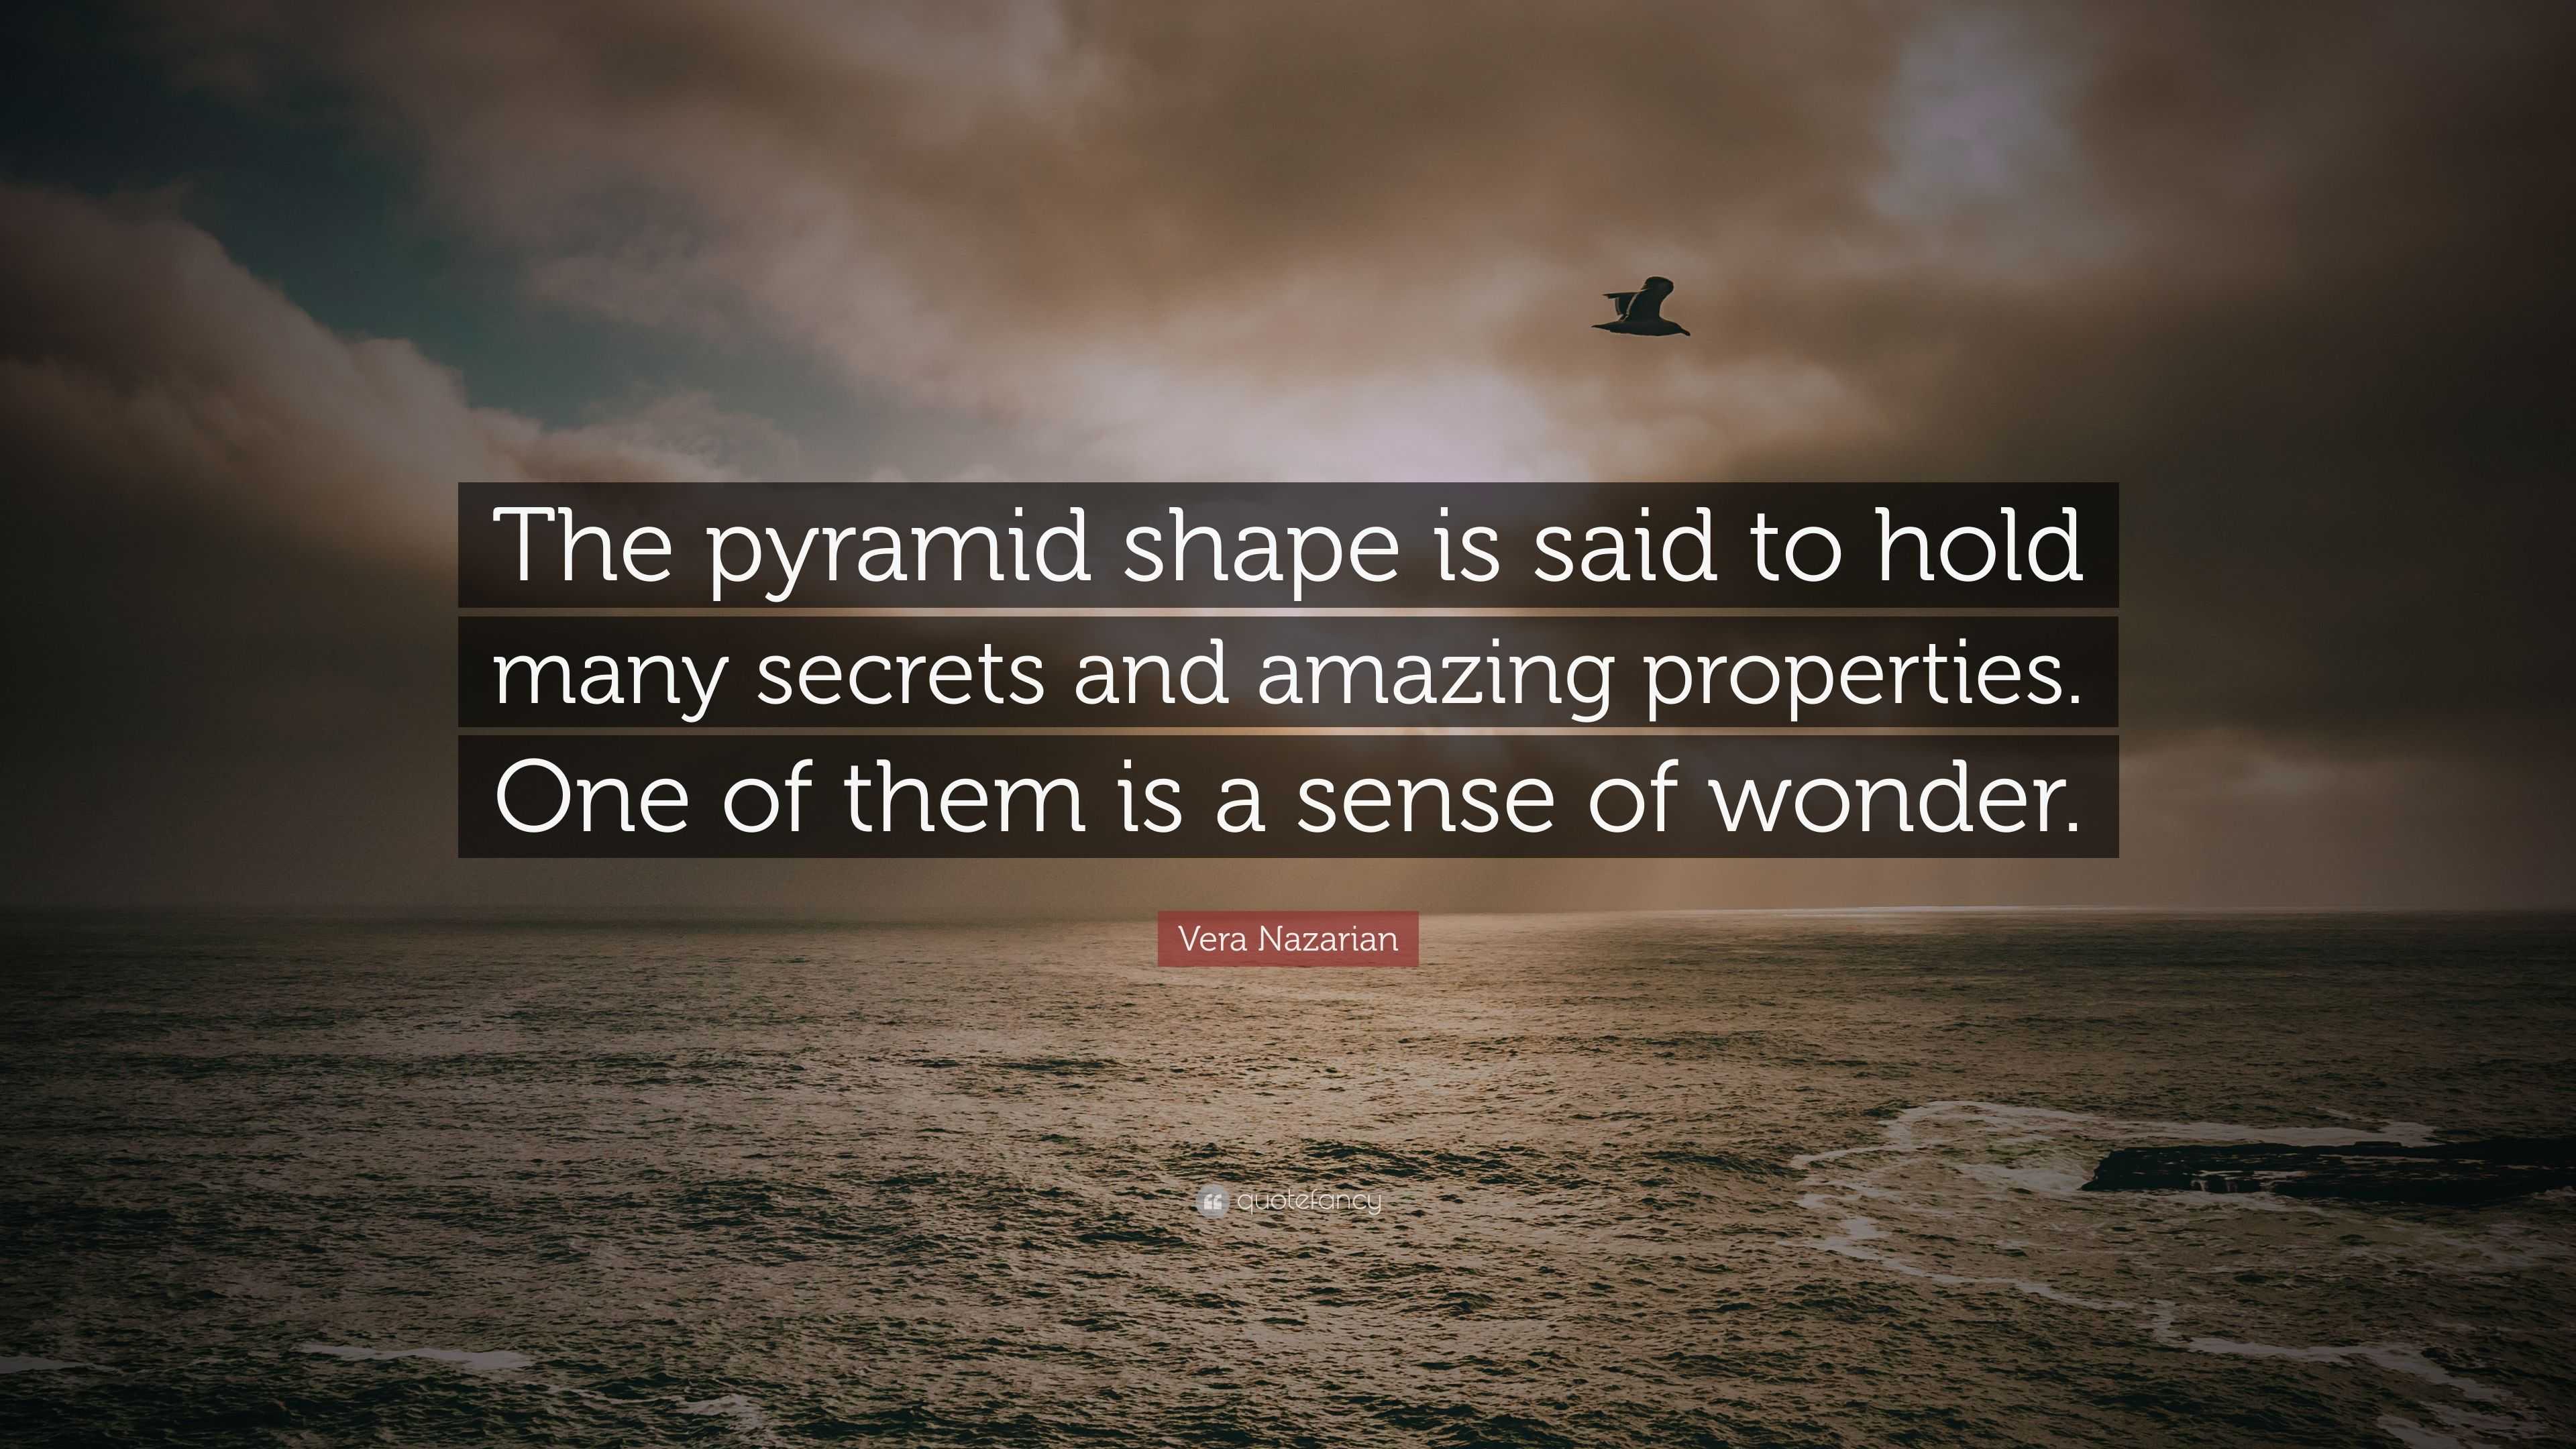 Vera Nazarian Quote: “The pyramid shape is said to hold many